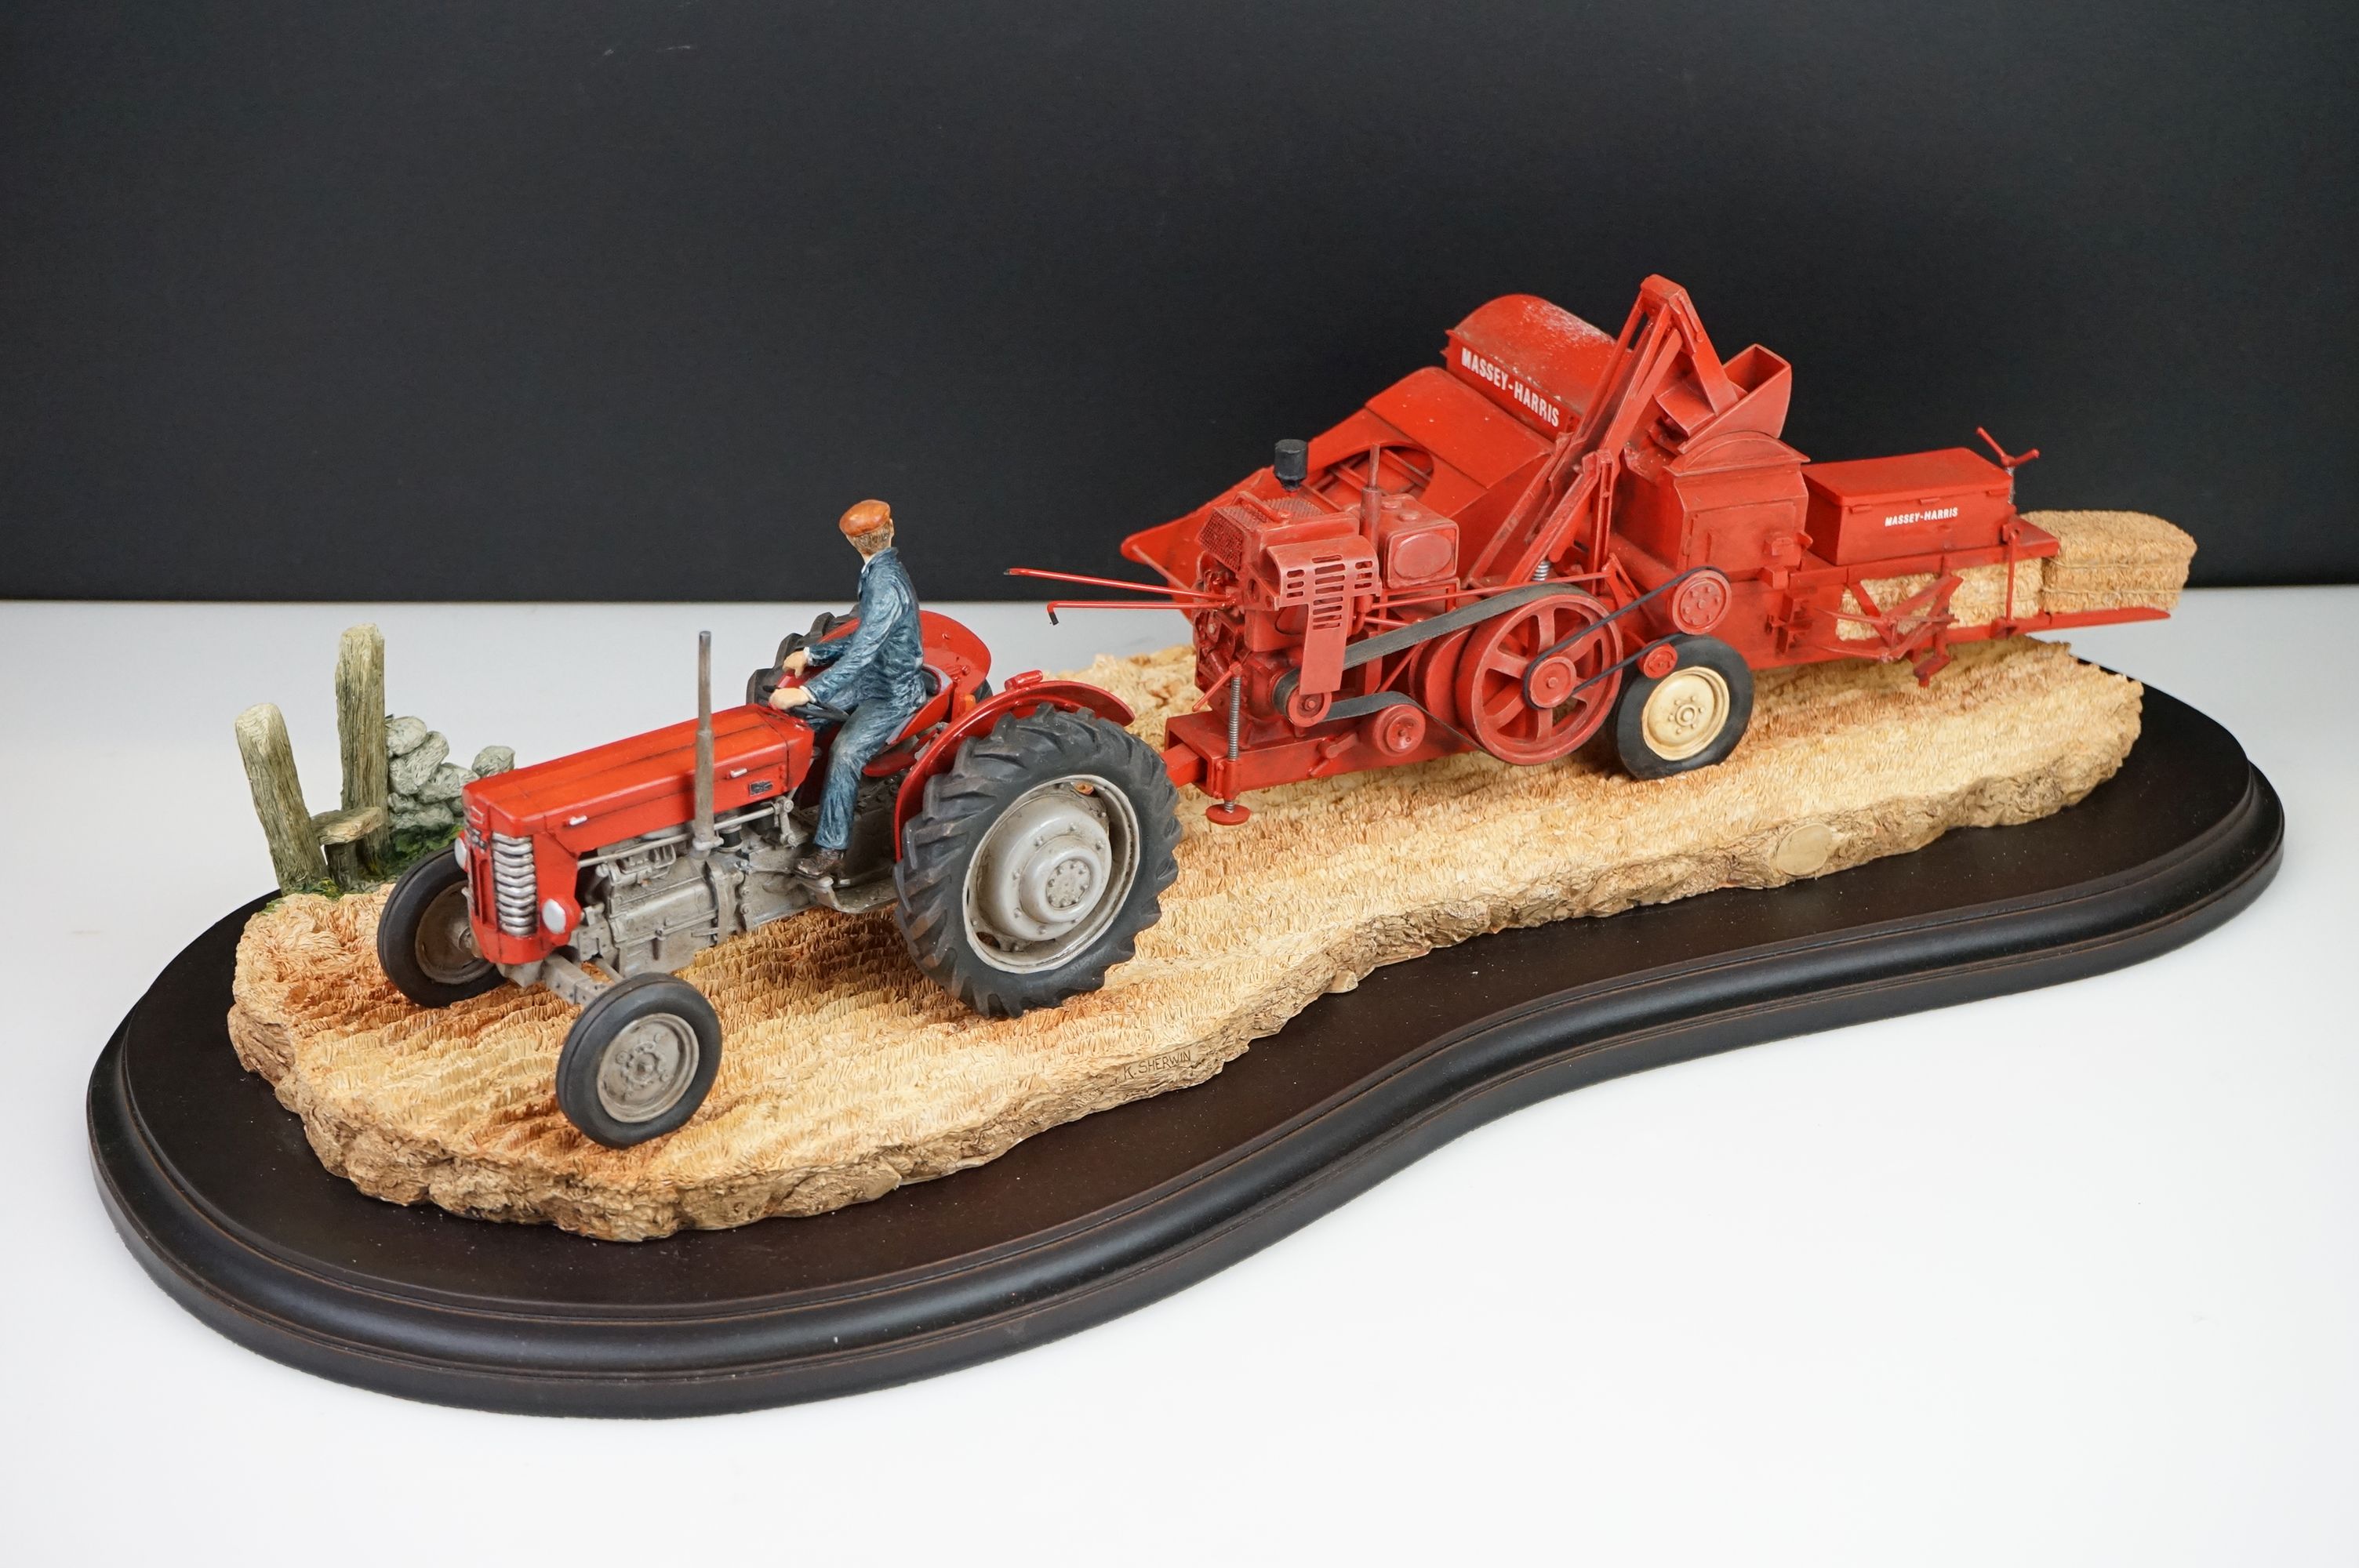 Country Artists Model of a Hay Baling titled ' Safely gathered in ' by Keith Sherwin on a wooden